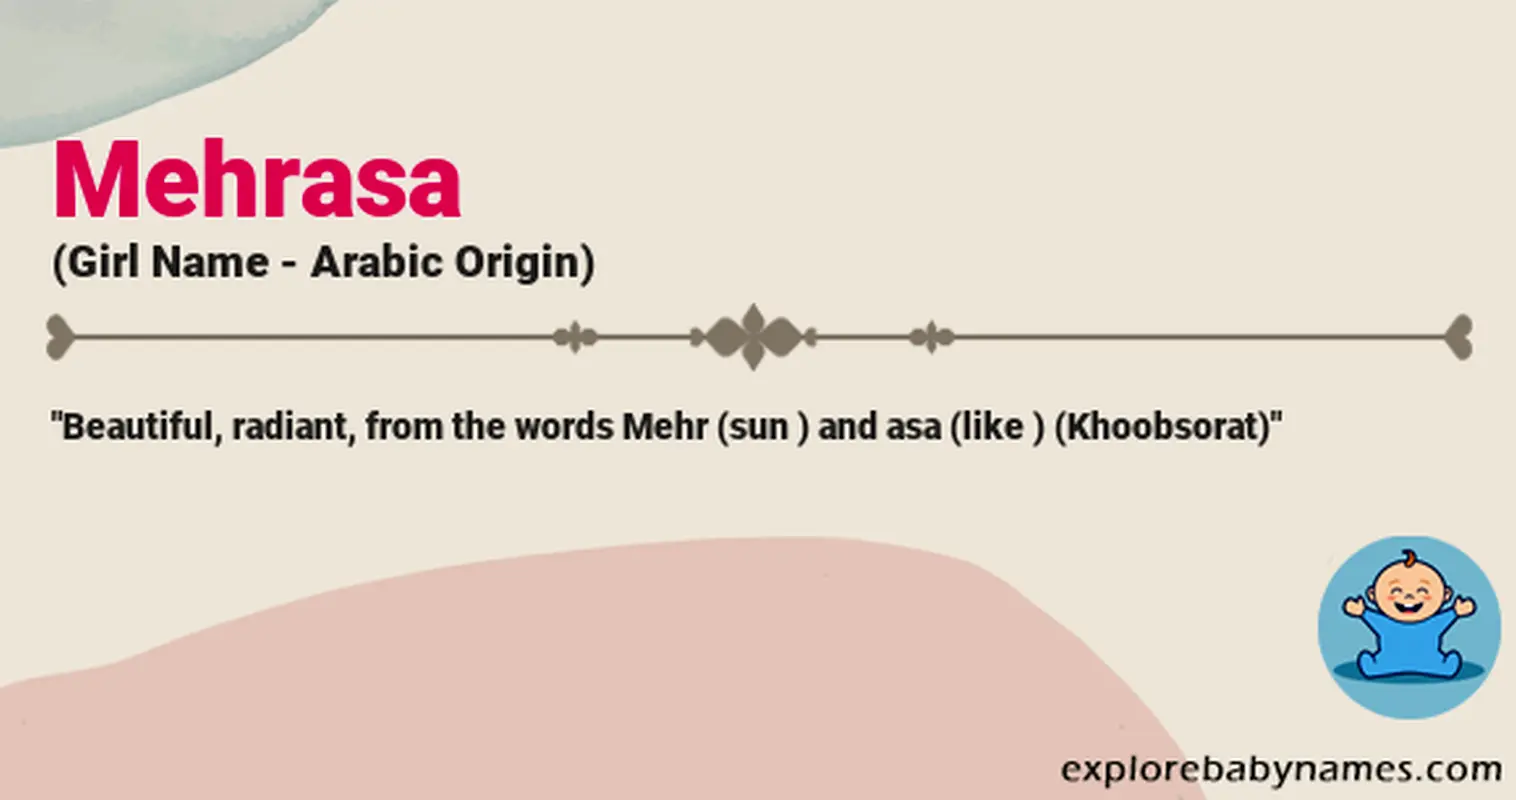 Meaning of Mehrasa